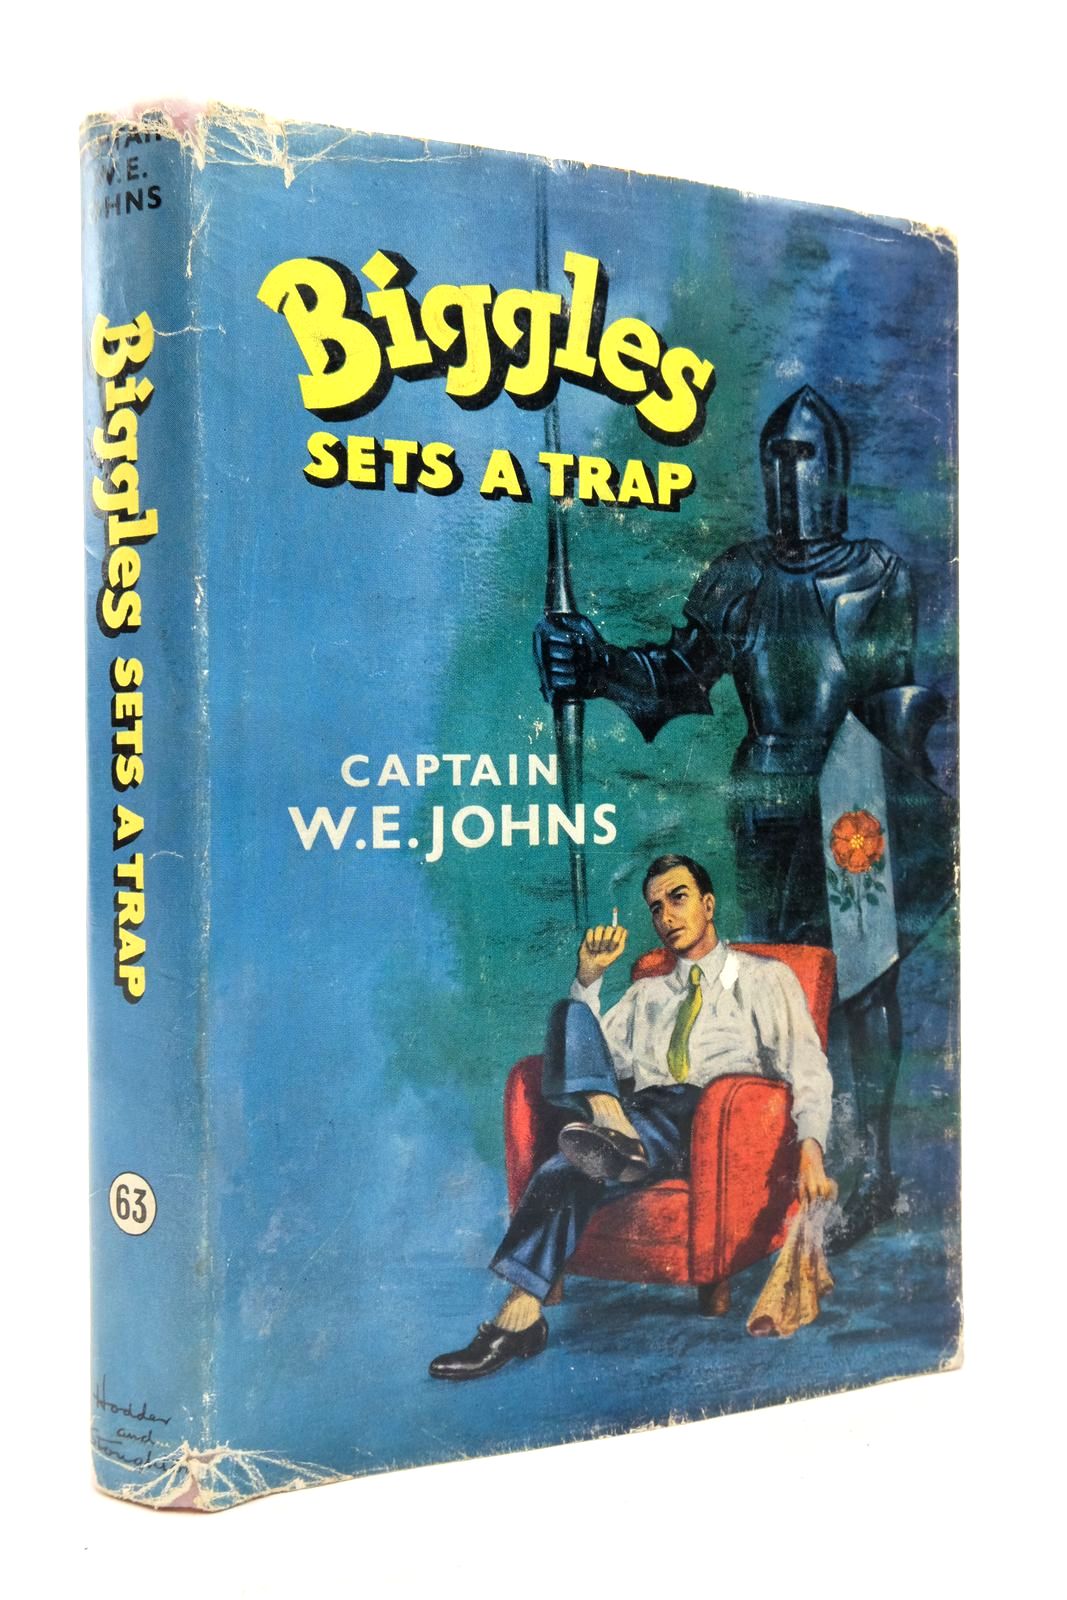 Photo of BIGGLES SETS A TRAP written by Johns, W.E. illustrated by Stead,  published by Hodder & Stoughton (STOCK CODE: 2137441)  for sale by Stella & Rose's Books